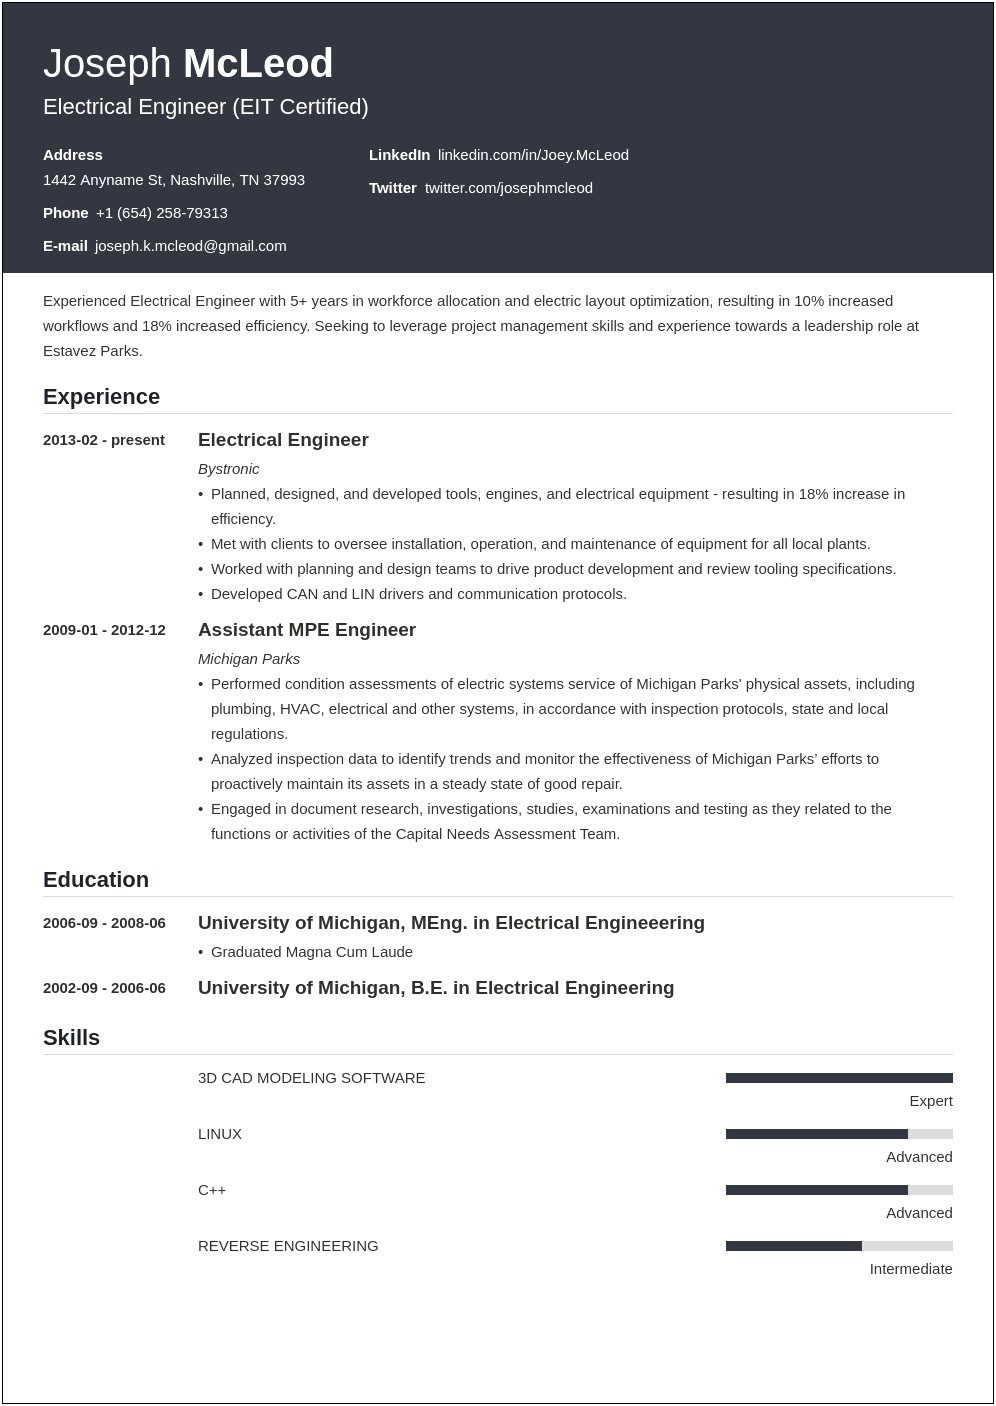 Resume Objective Examples For Electrical Engineer